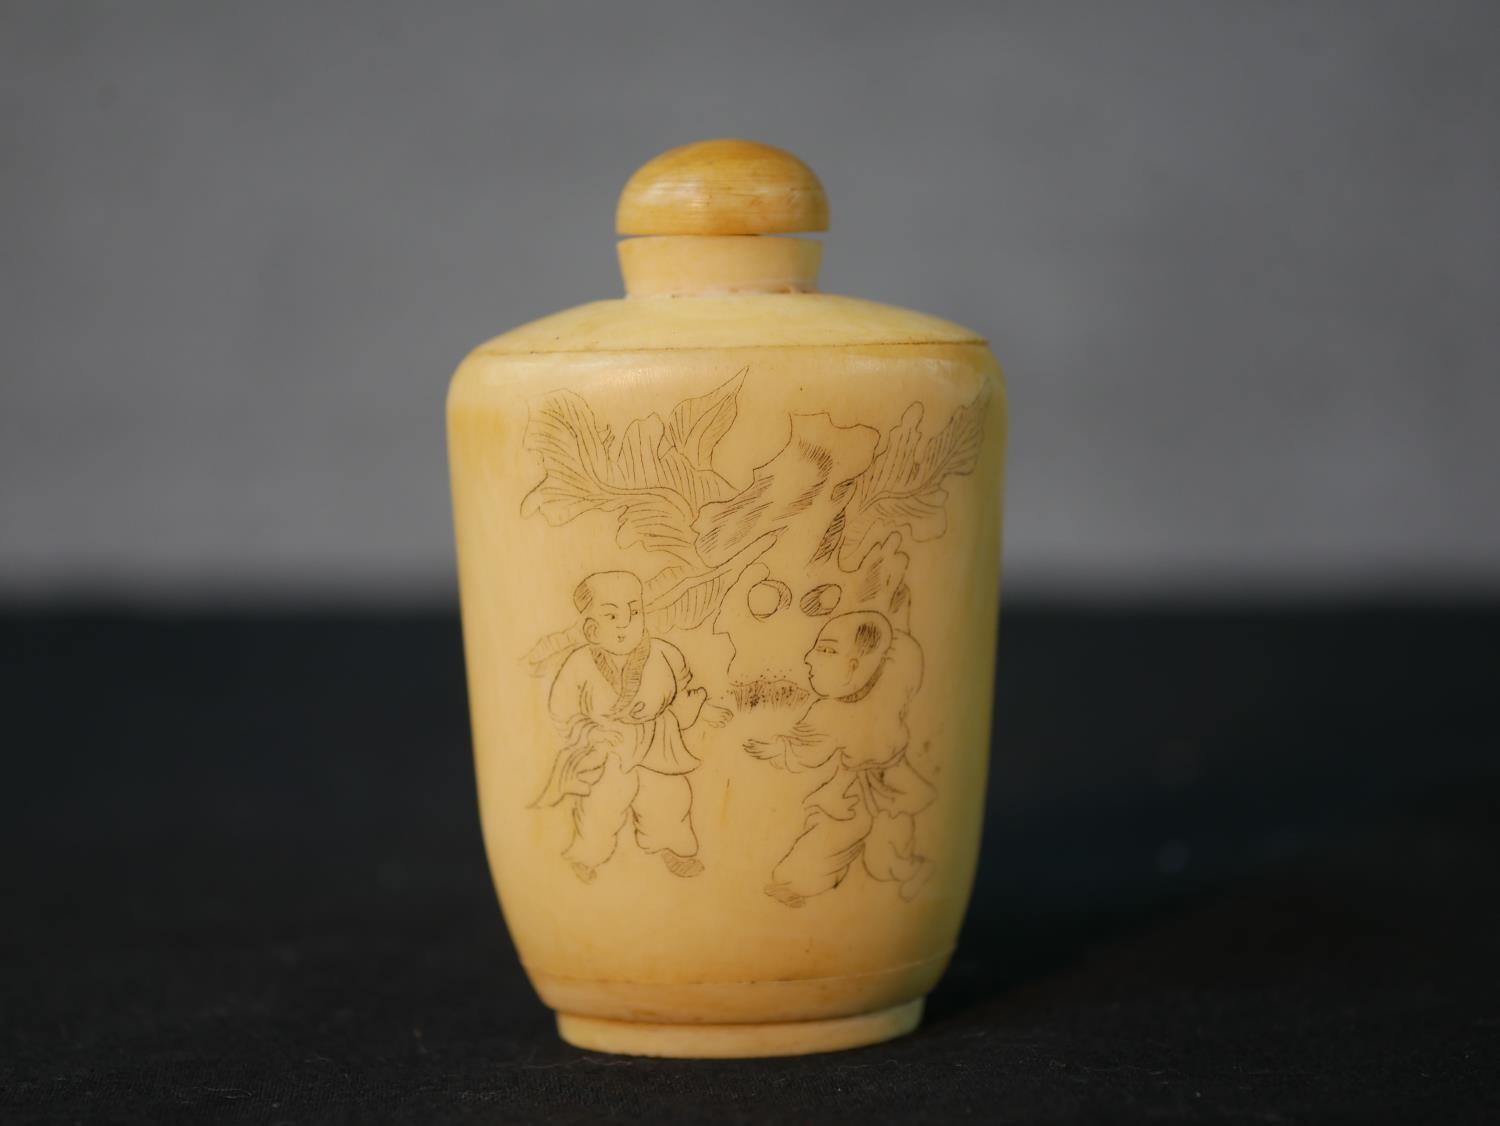 Three etched bone Chinese snuff bottles along with a Bavarian printed ceramic snuff bottle with - Image 3 of 10